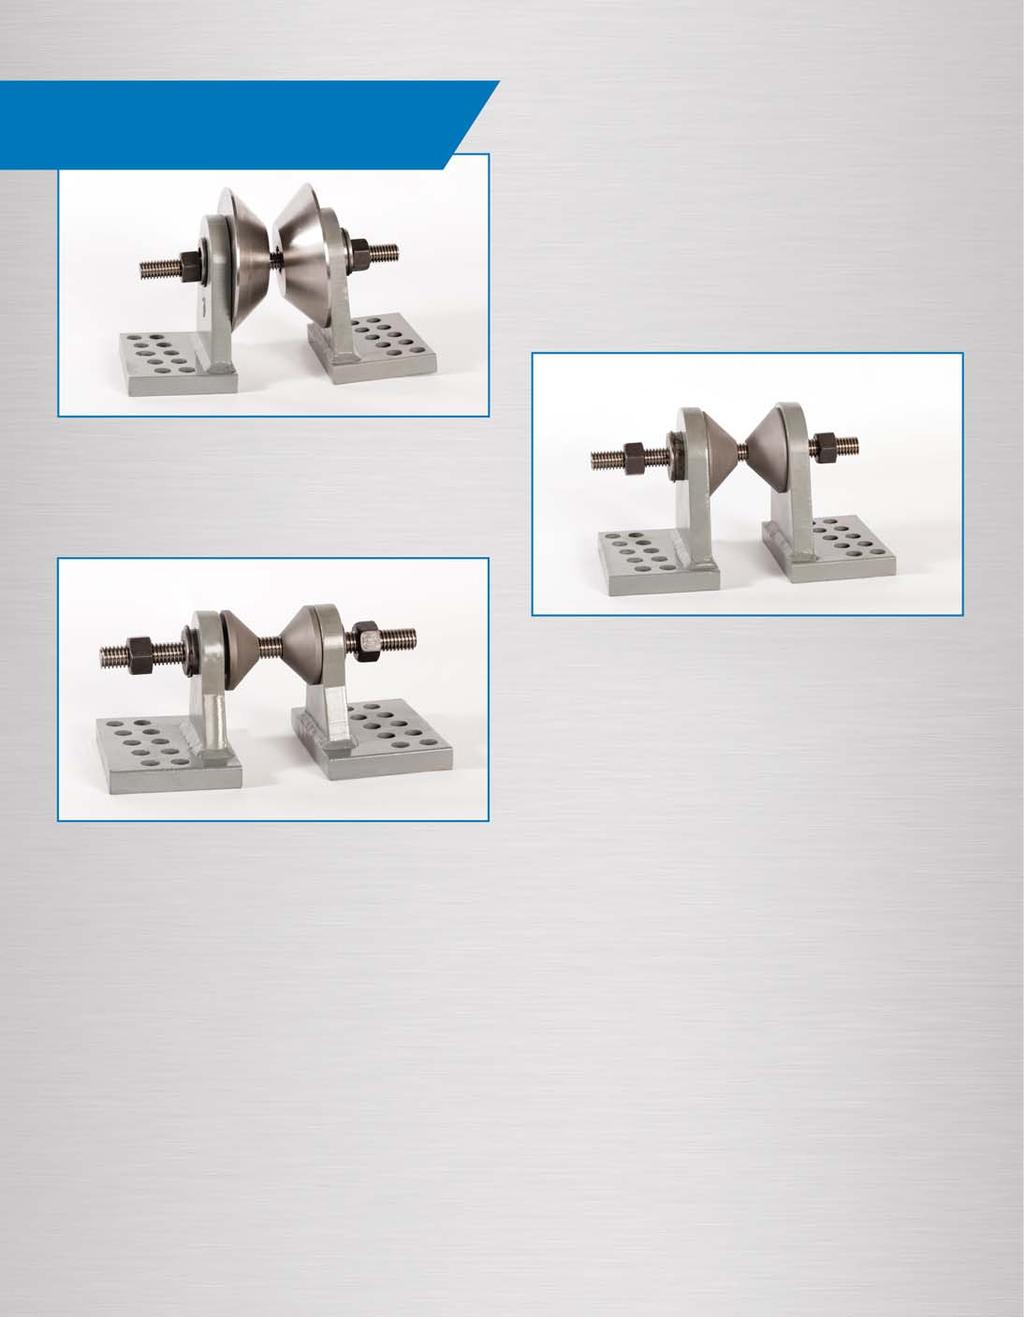 Cone Holders CC-T-L-cone-set-D shown Machine requires two cone holder sets to be complete.